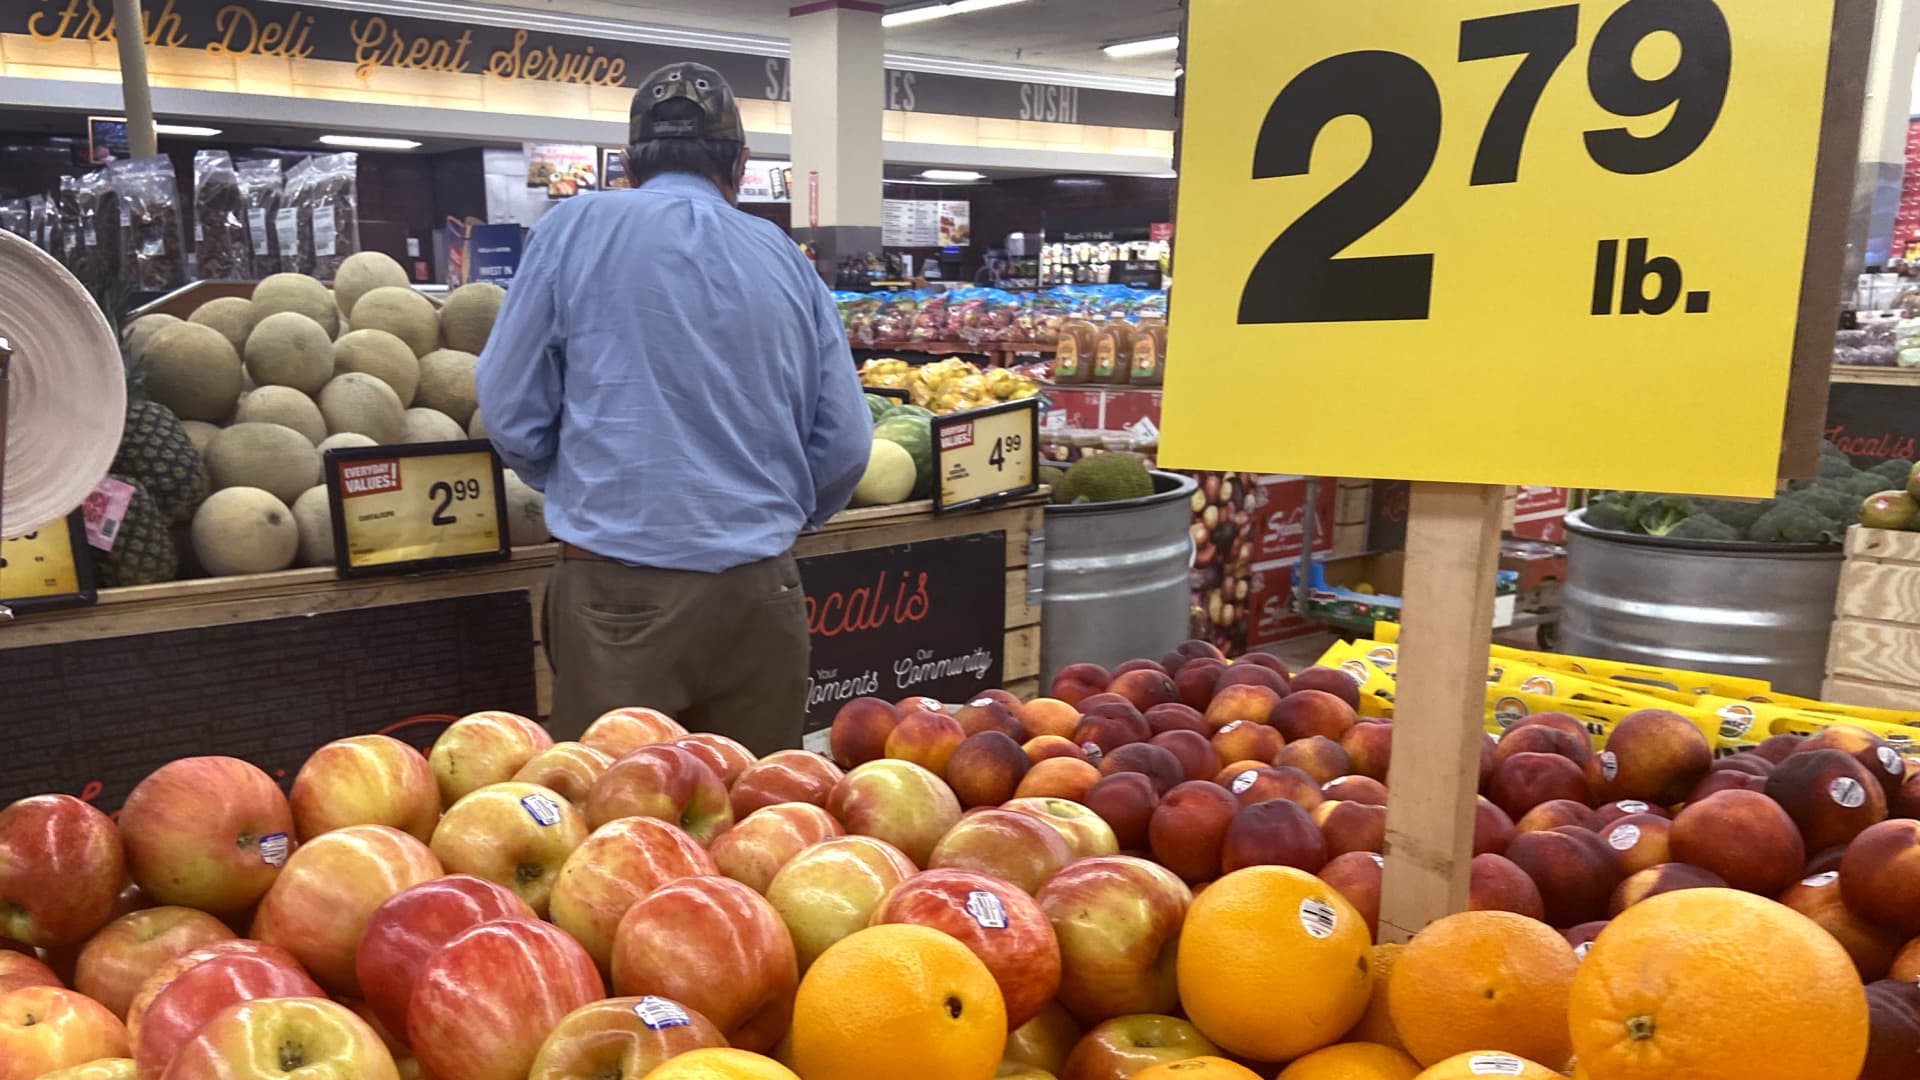 Customers shop for produce at a supermarket on June 10, 2021 in Chicago, Illinois.